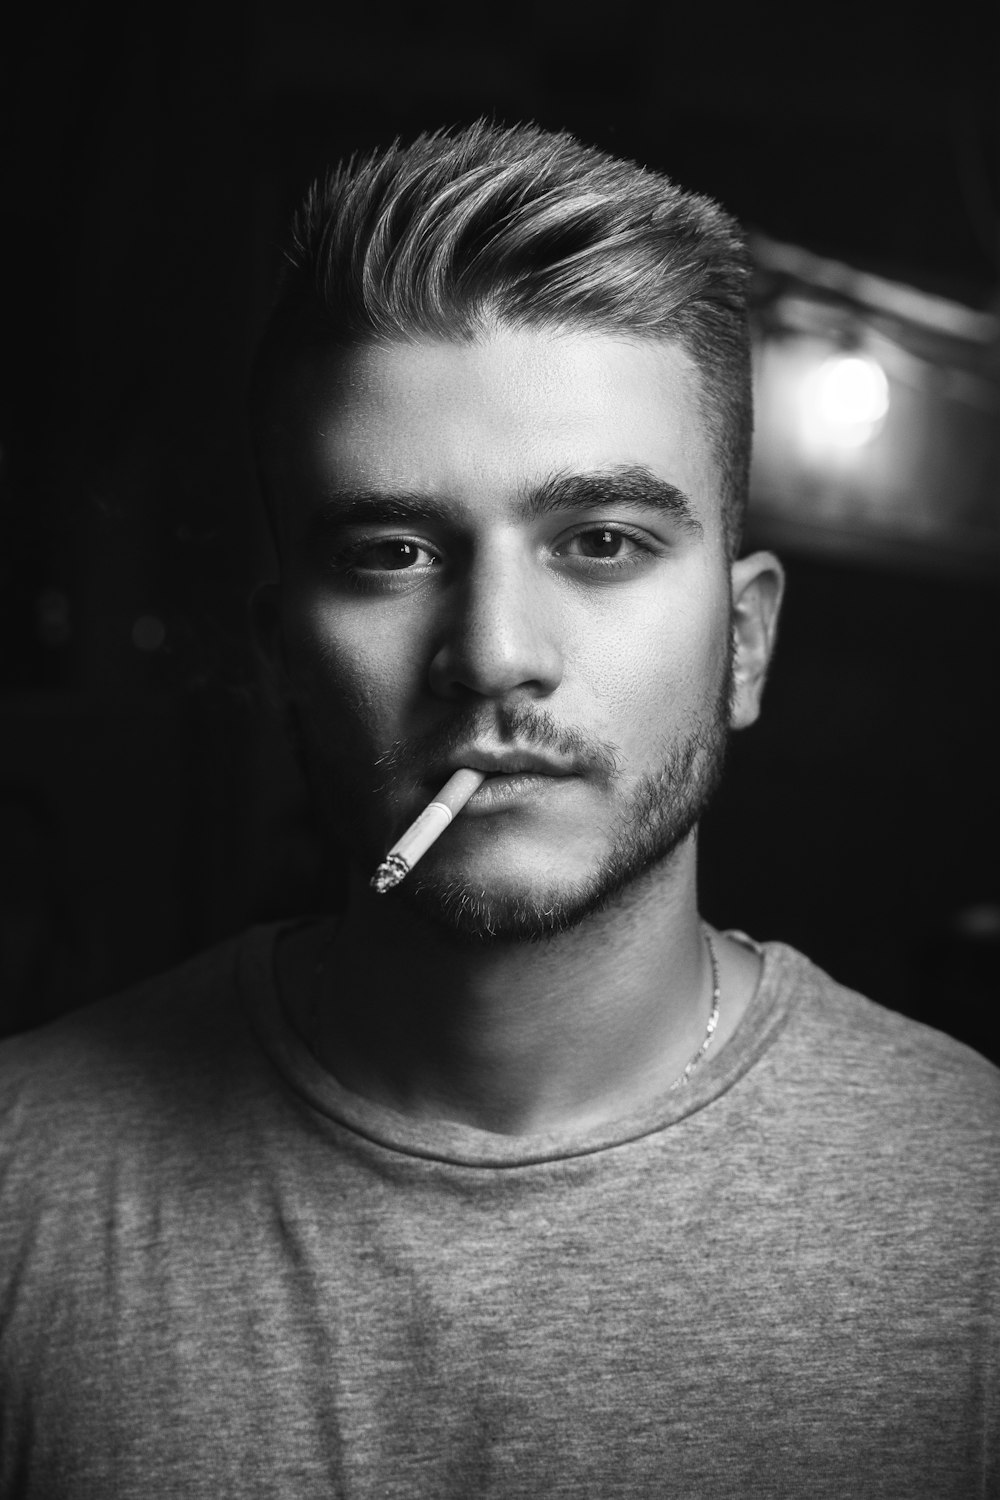 grayscale photography of man smoking while taking picture